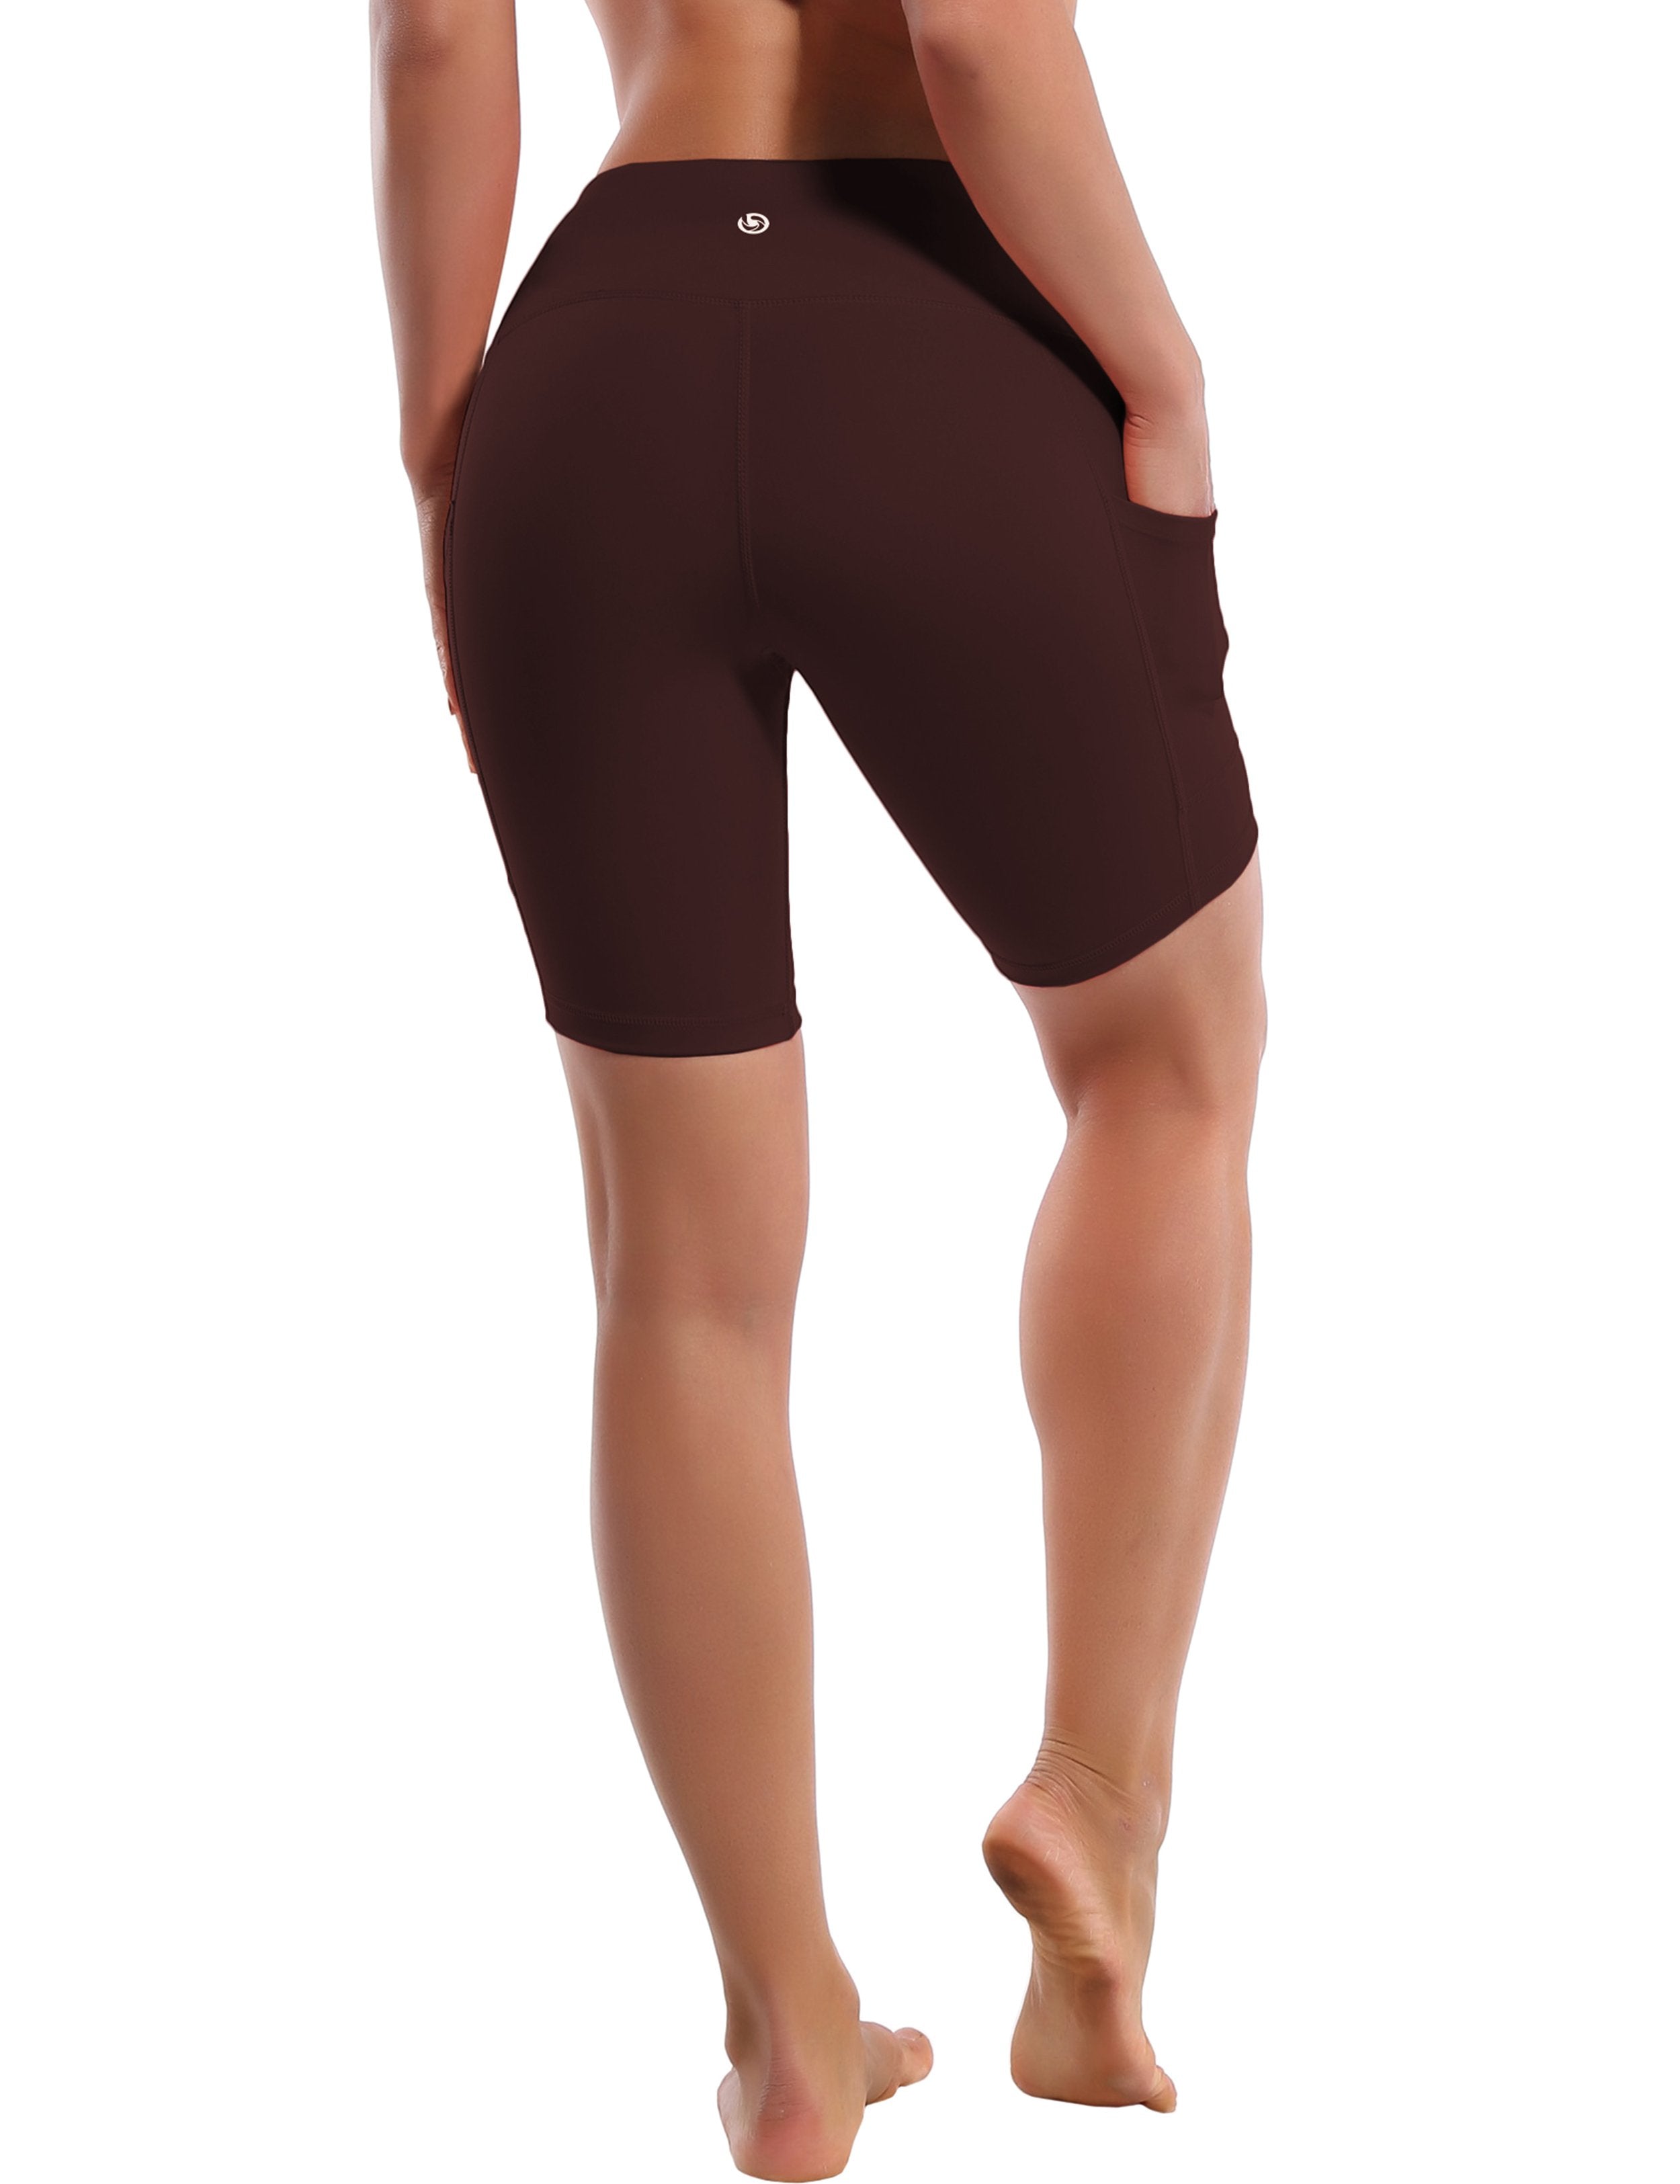 8" Side Pockets Jogging Shorts mahoganymaroon Sleek, soft, smooth and totally comfortable: our newest style is here. Softest-ever fabric High elasticity High density 4-way stretch Fabric doesn't attract lint easily No see-through Moisture-wicking Machine wash 75% Nylon, 25% Spandex